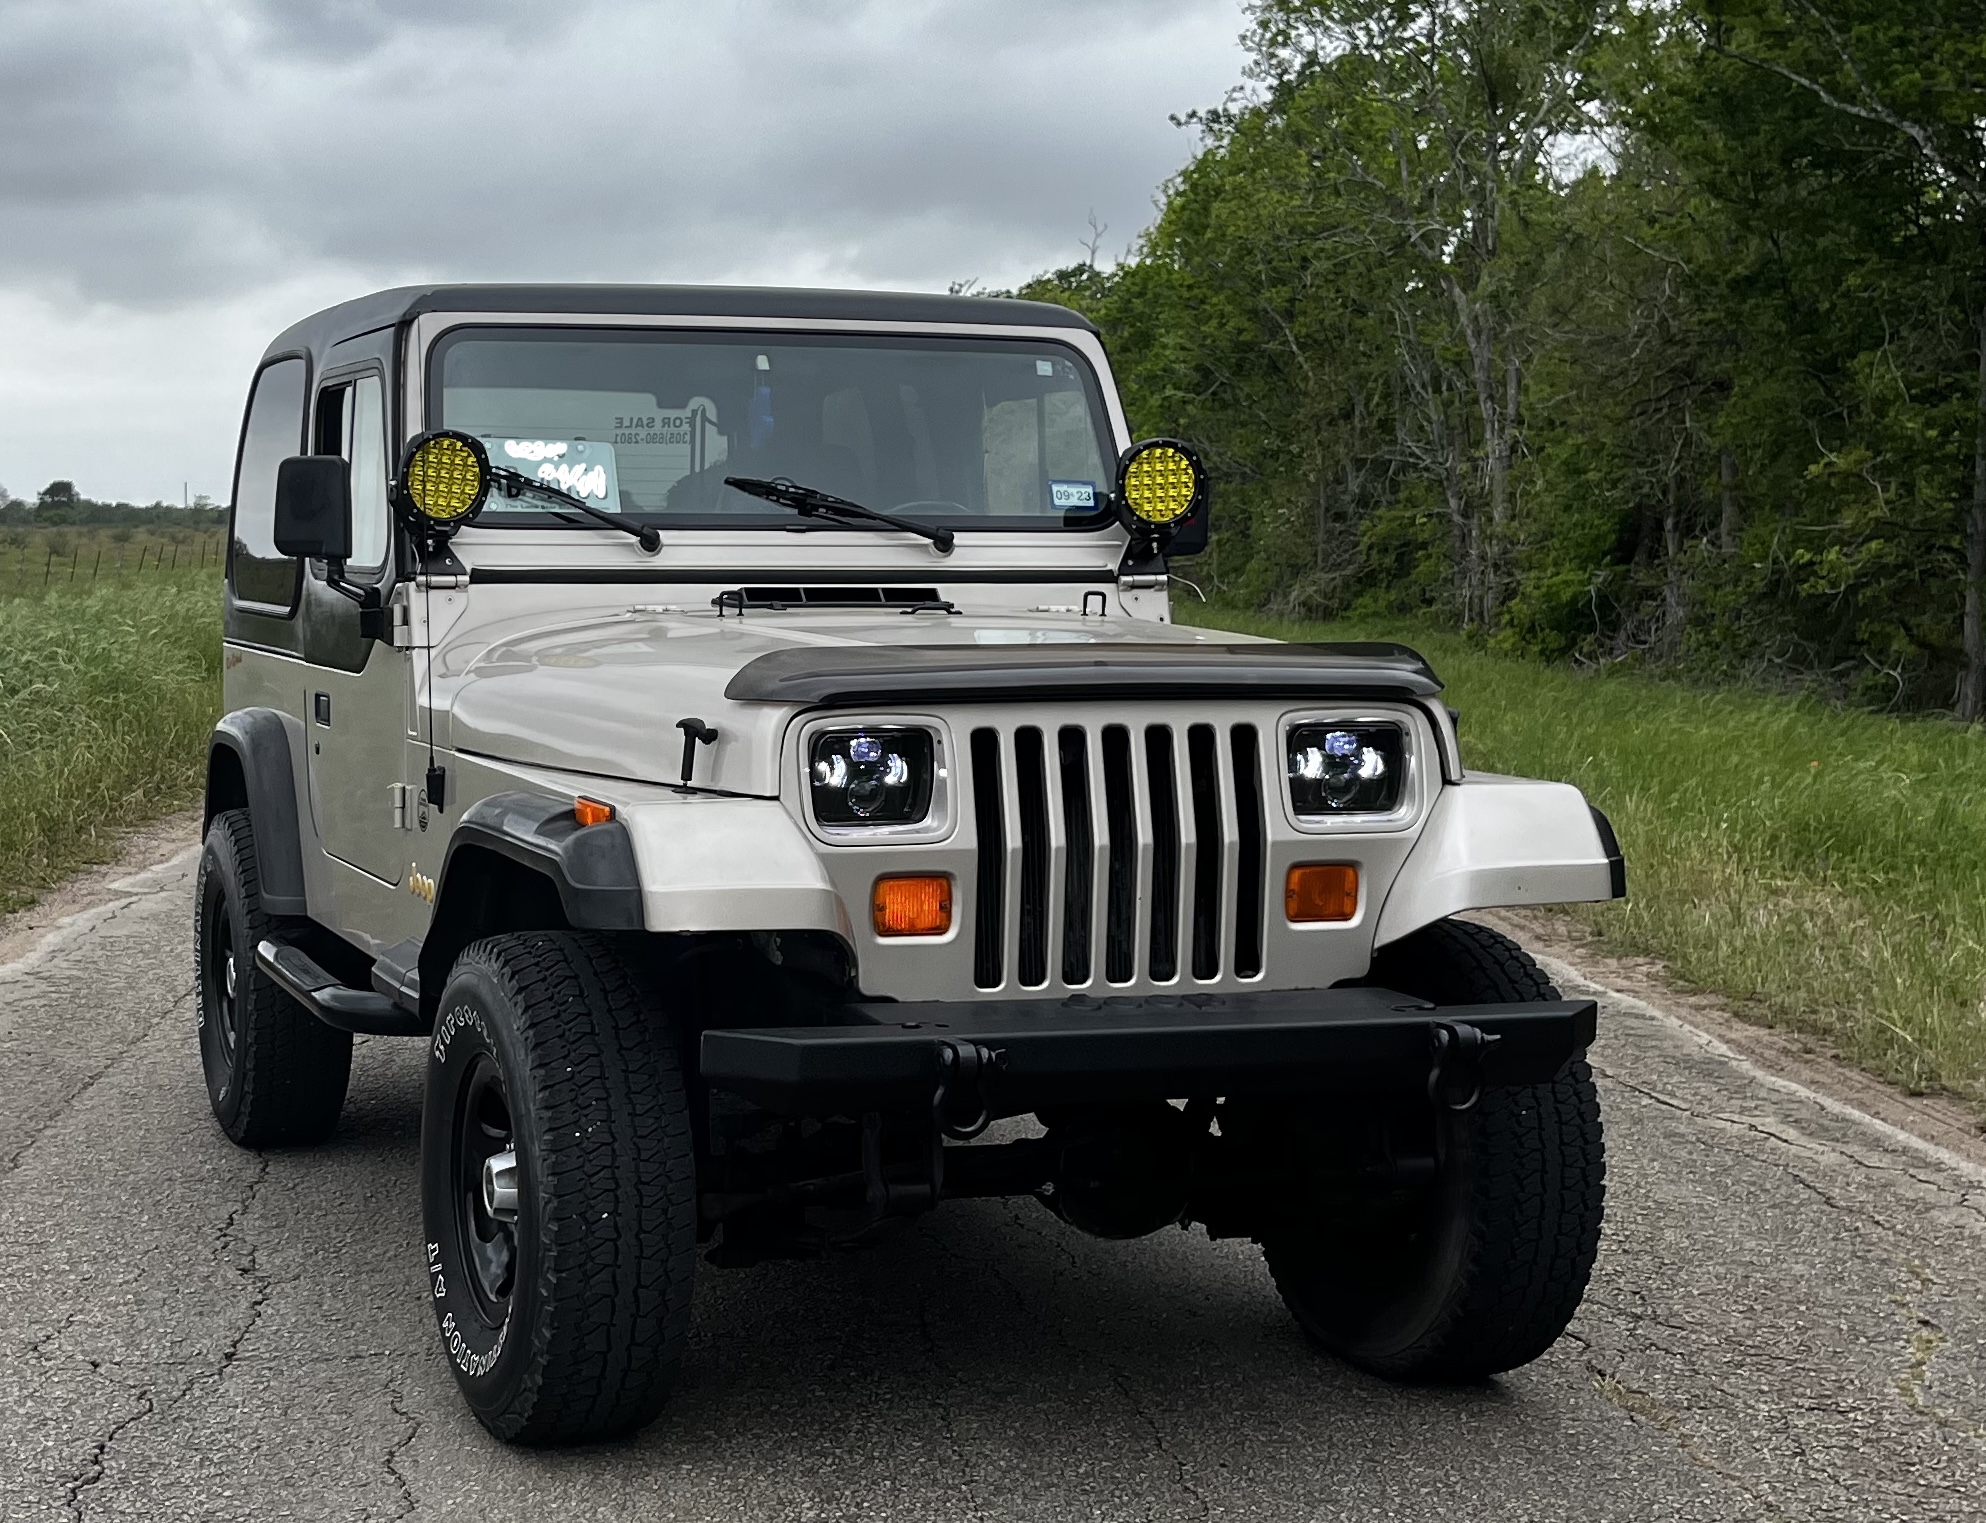 Used 1995 Jeep Wrangler for Sale Right Now - Autotrader